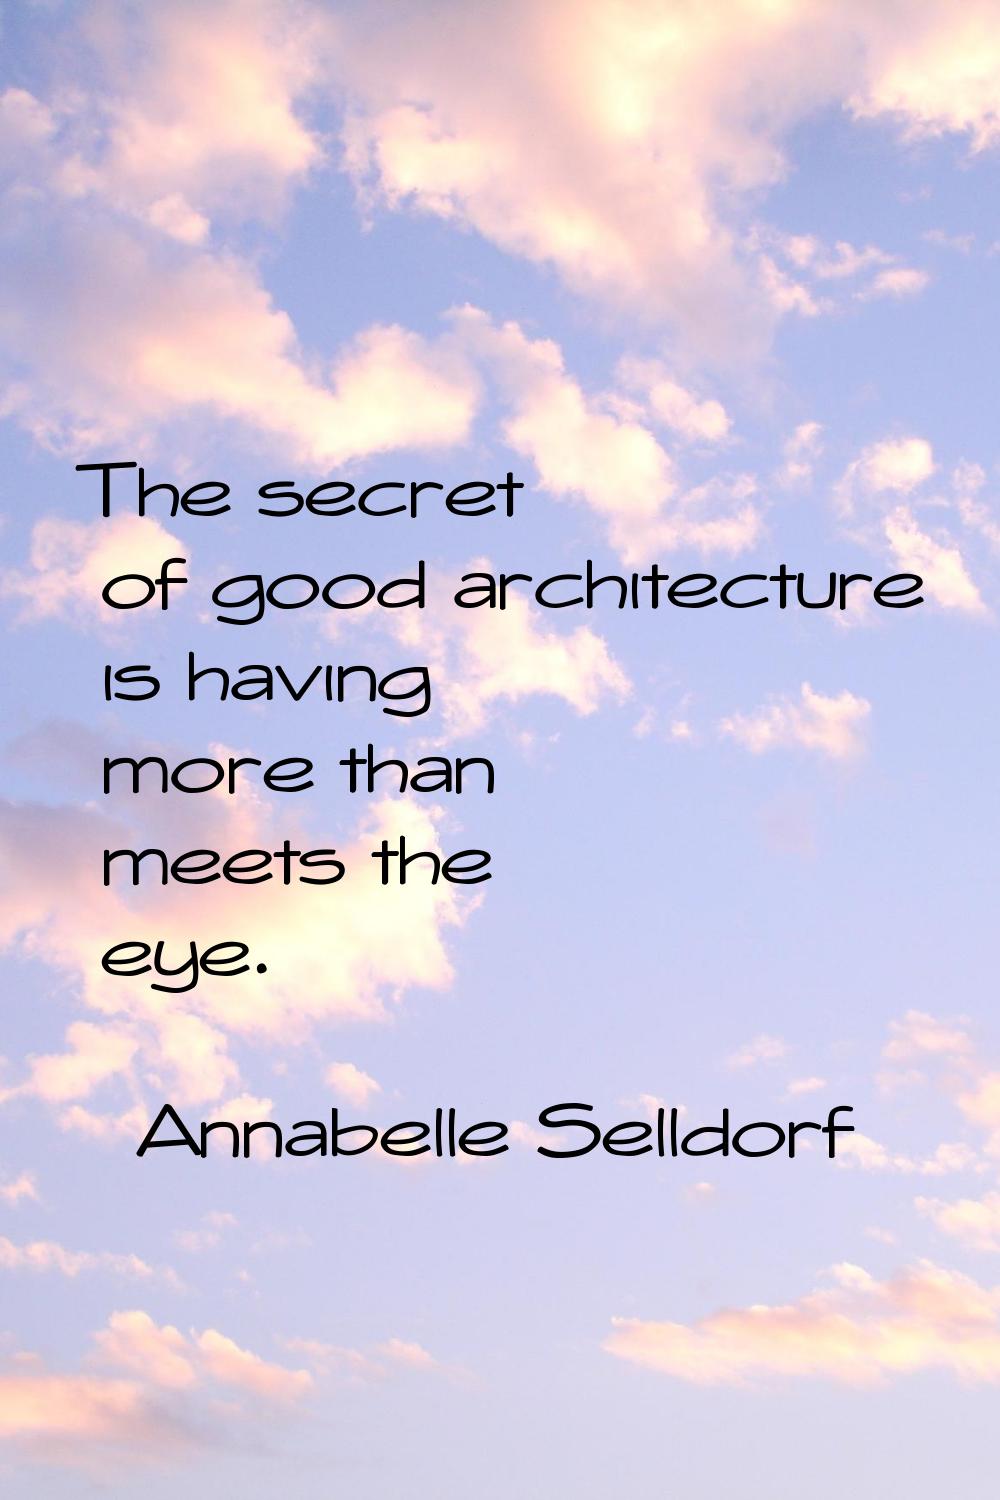 The secret of good architecture is having more than meets the eye.